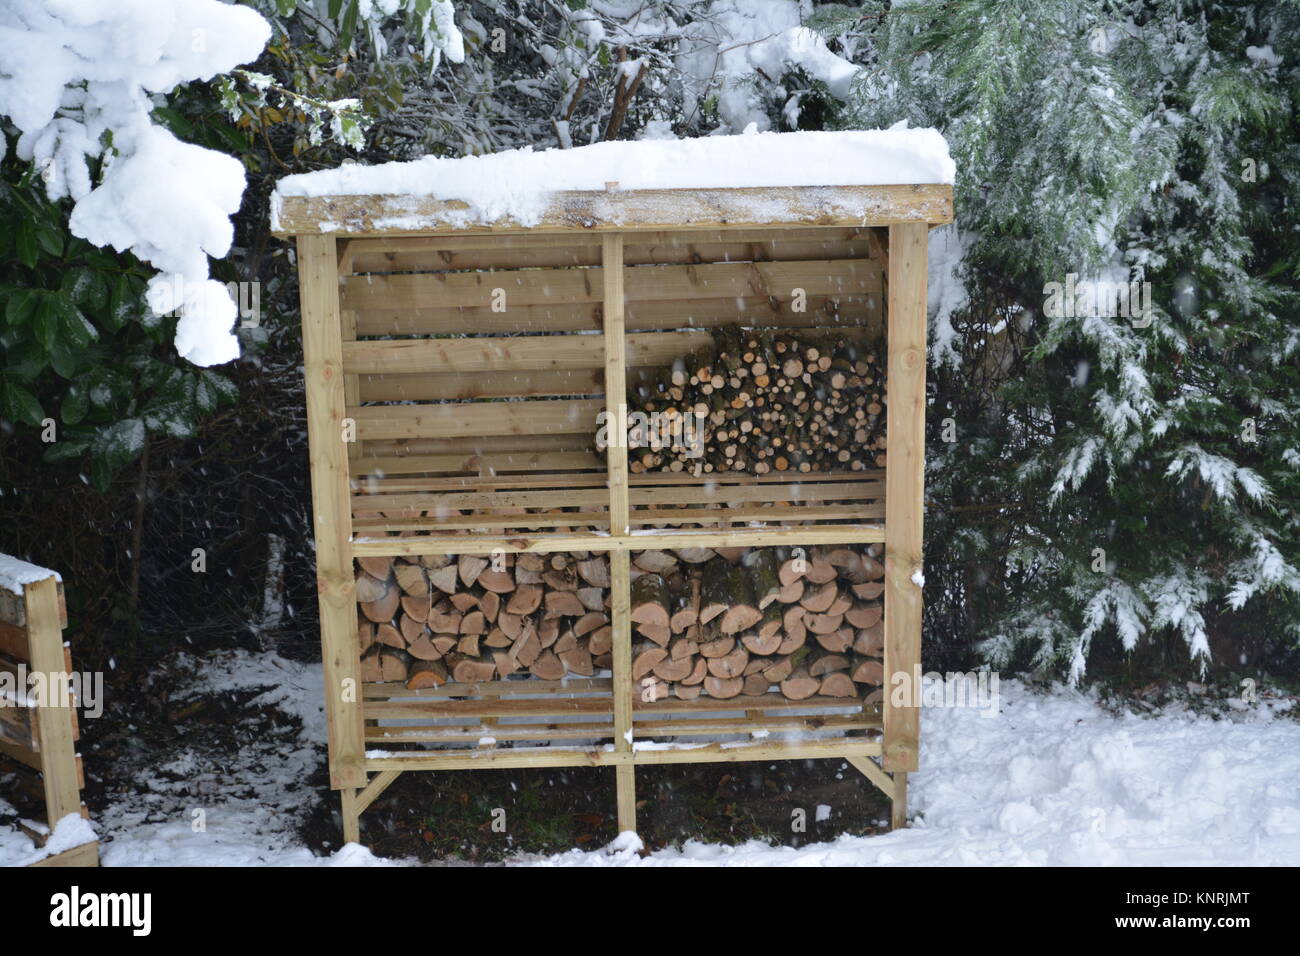 Timber log store with a mono pitch roof in garden made from treated wood  covered in snow with surrounding trees and filled with some logs and  kindling Stock Photo - Alamy